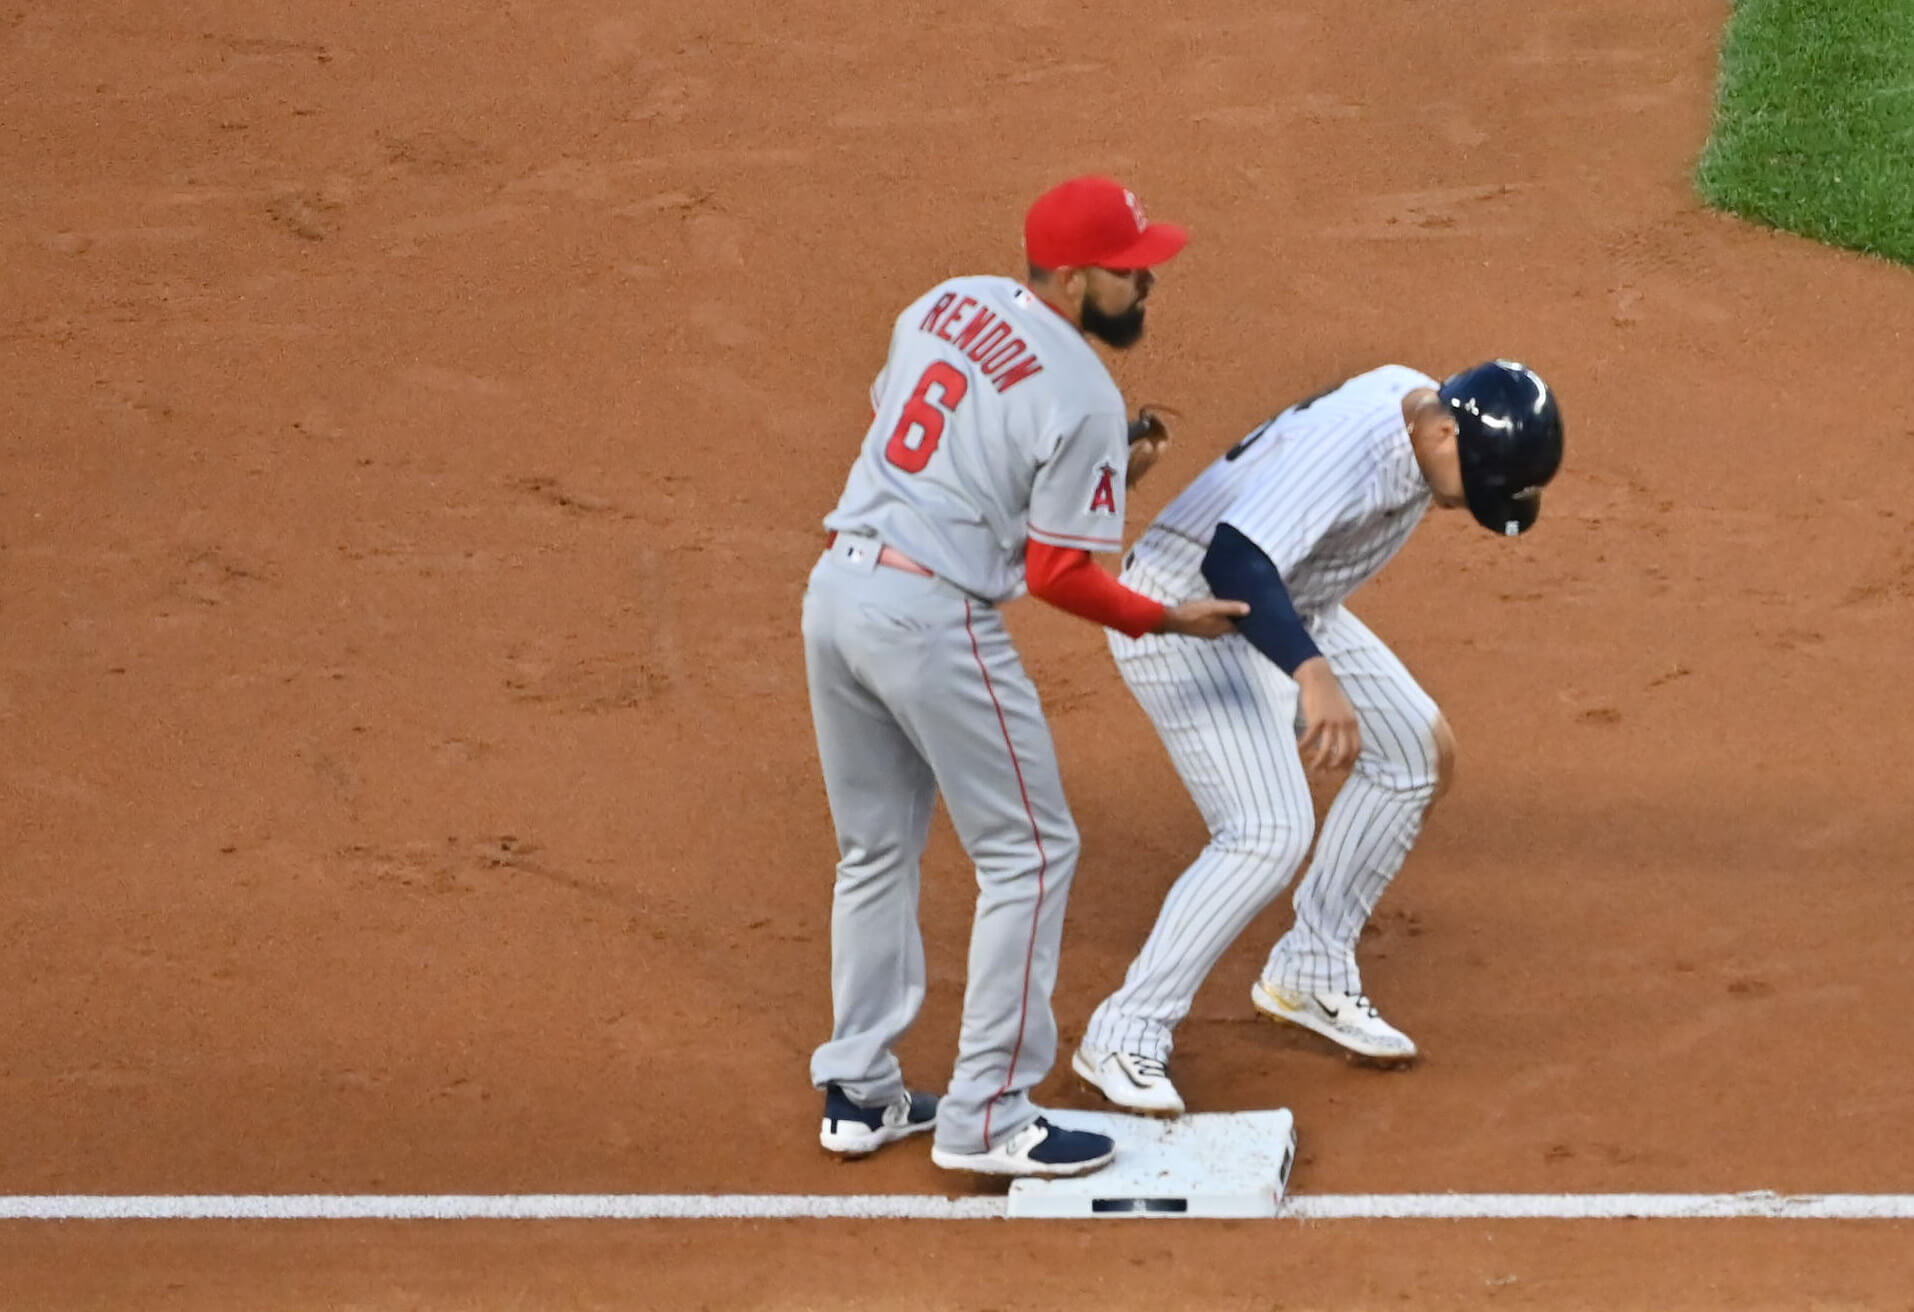 Los Angeles Angels infielder Anthony Rendon grabs the arm of a Yankees player while at third base on April 18, 2023.